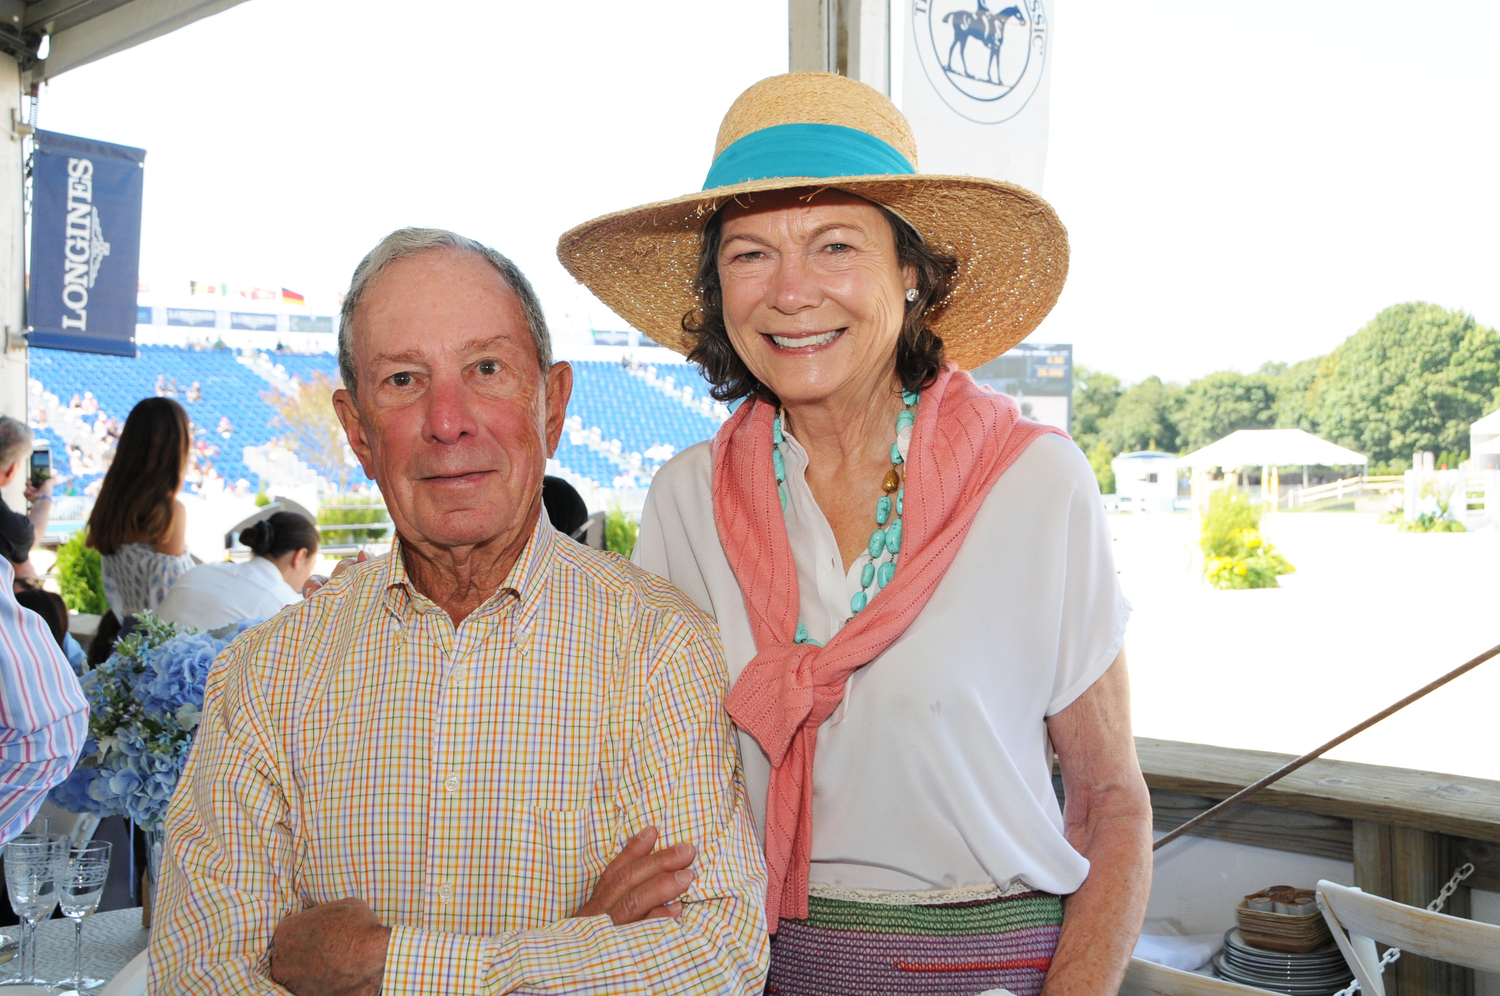 Former New York City Mayor Michael Bloomberg with Diana Taylor in the VIP Tent at the Grand Prix at the Hamptons Classic Horse Show on Sunday.     RICHARD LEWIN